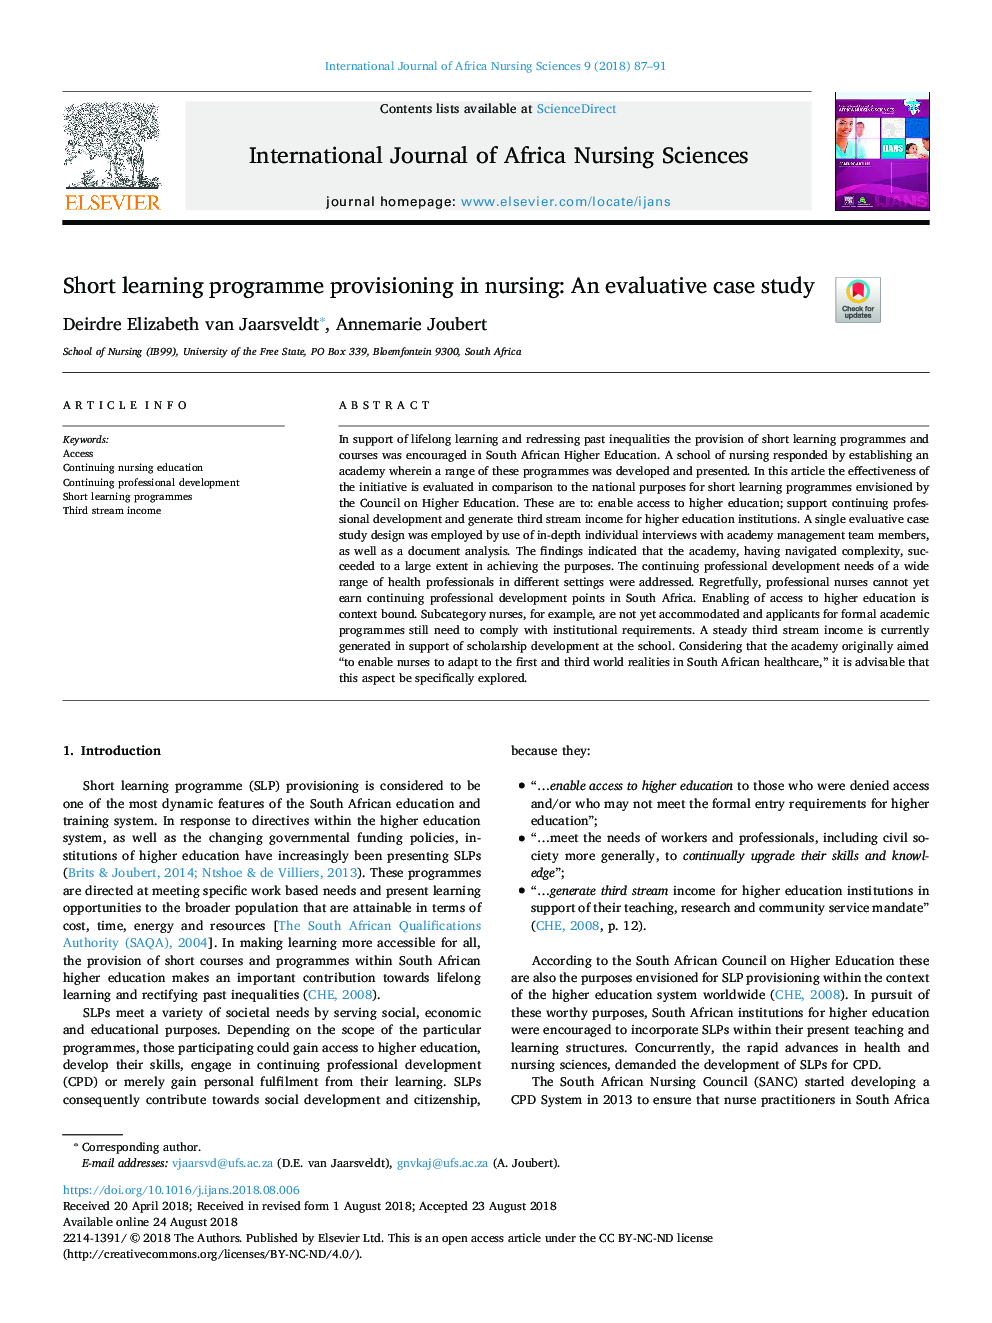 Short learning programme provisioning in nursing: An evaluative case study